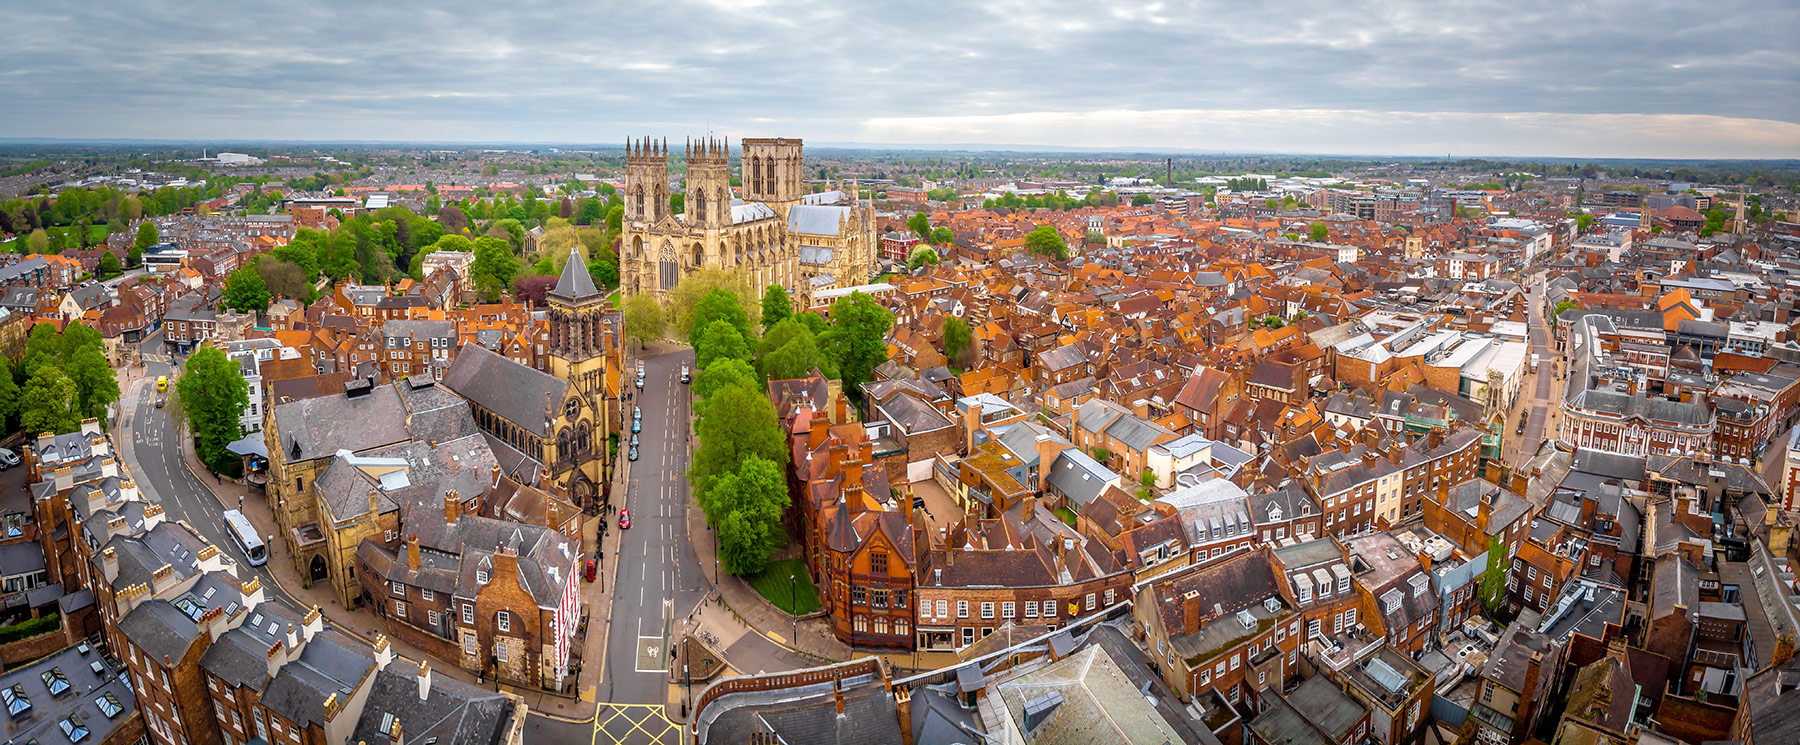 Aerial photograph of York